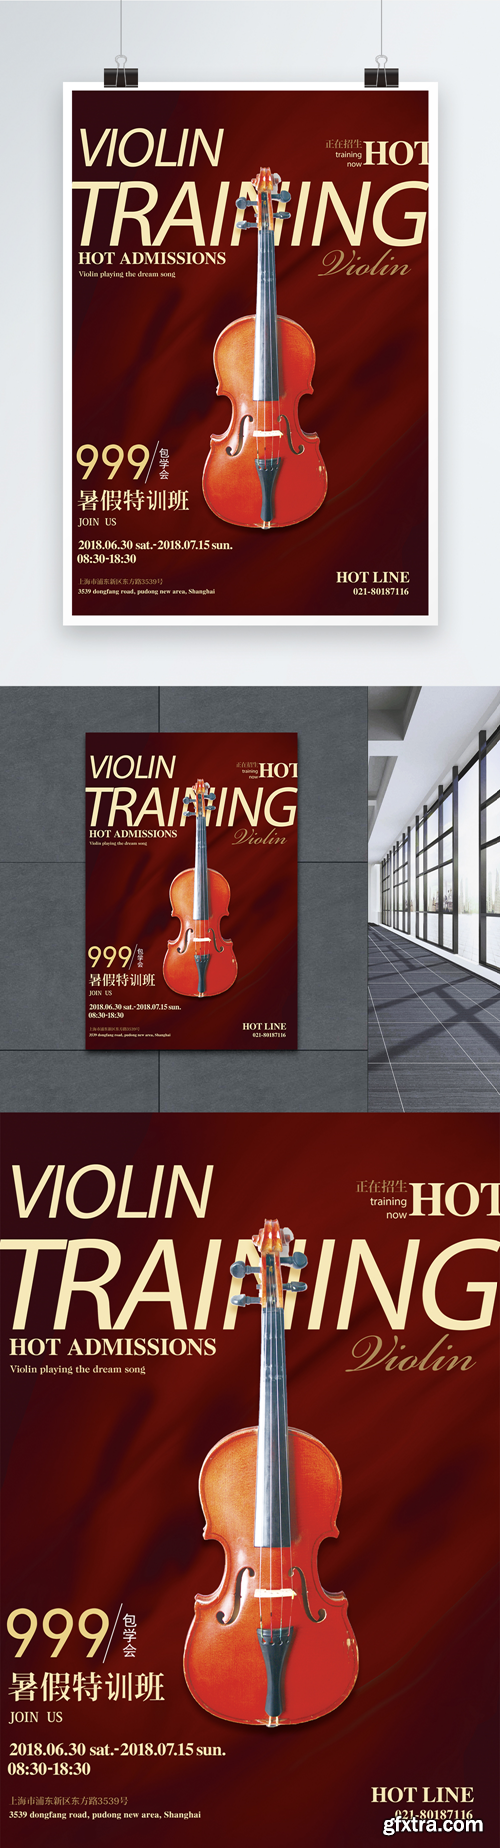 violin recruiting posters